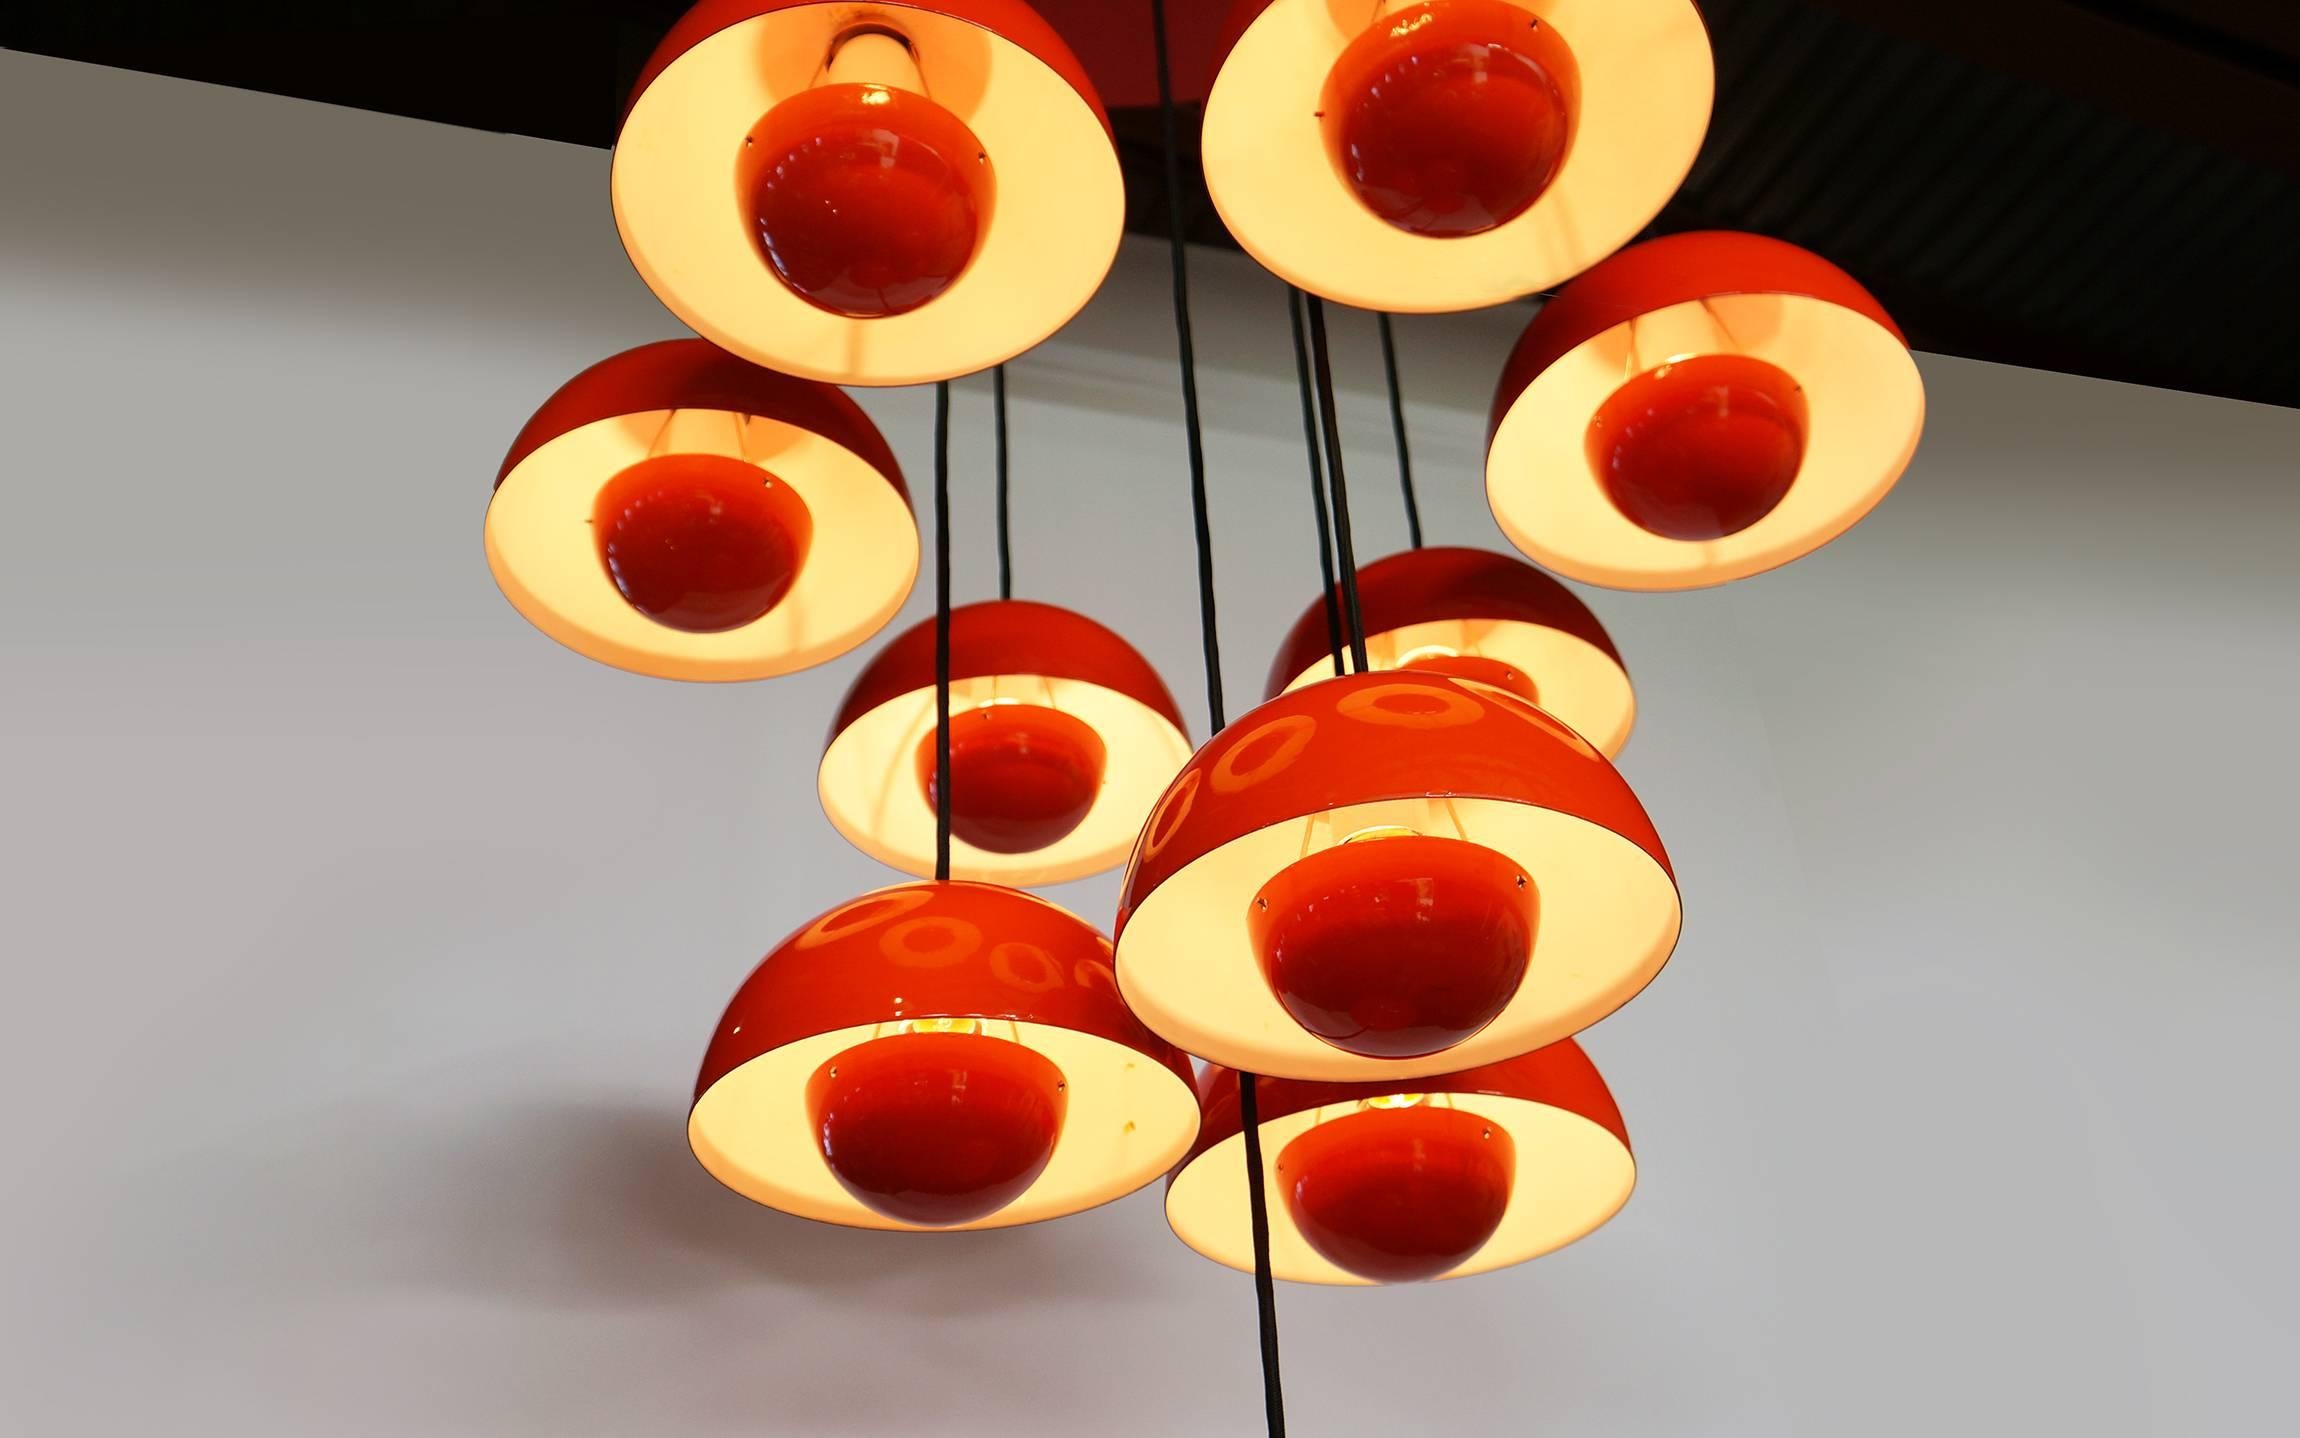 A cluster of ten vintage Verner Panton for Louis Poulsen, Denmark, Flowerpots in red/orange enamel, mounted according to the original specifications on a red painted ceiling plate. All of the lamps are vintage originals with real glass enamel. There